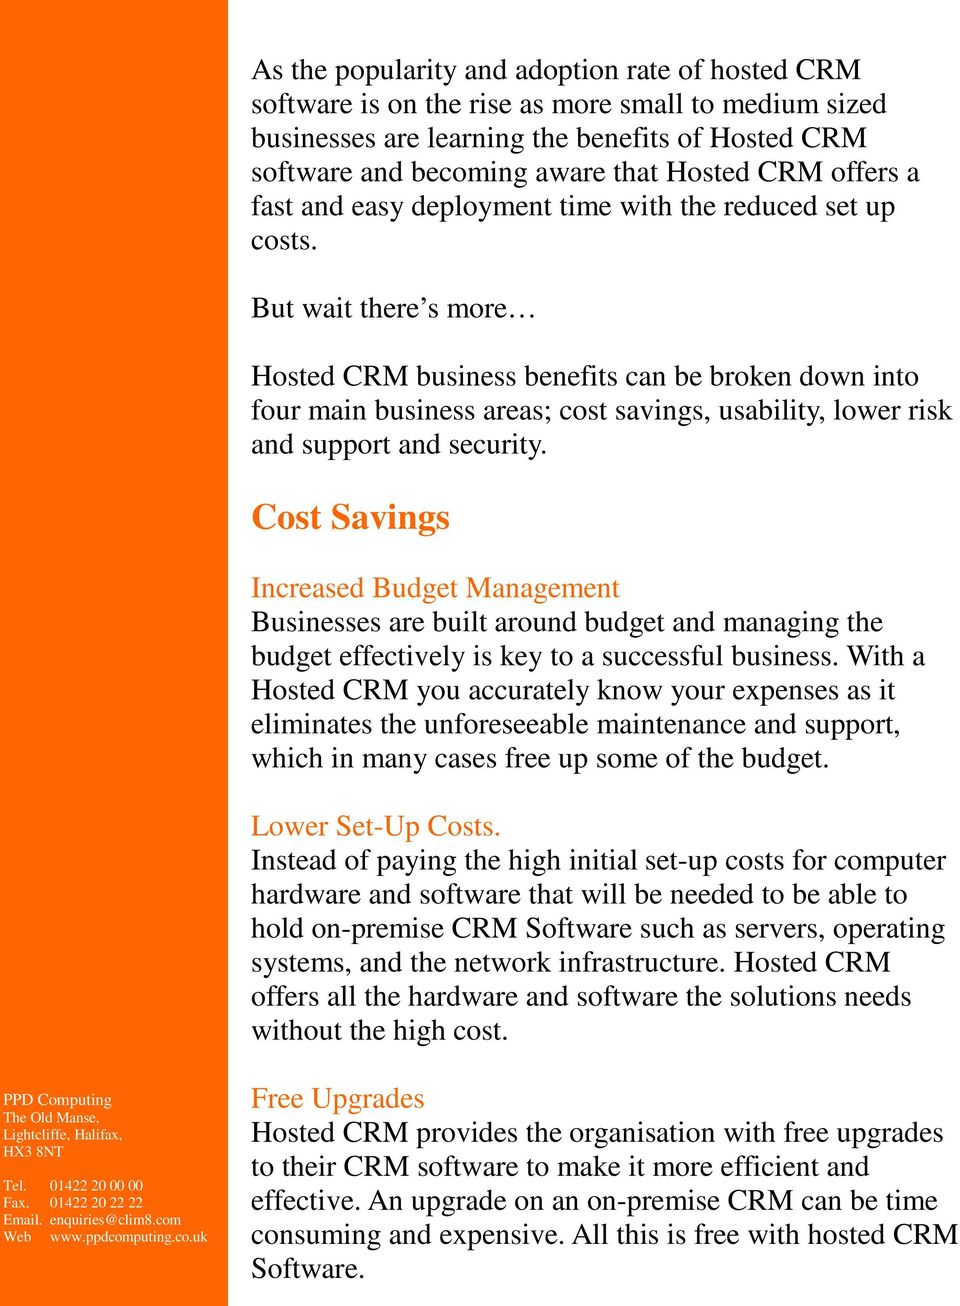 But wait there s more Hosted CRM business benefits can be broken down into four main business areas; cost savings, usability, lower risk and support and security.